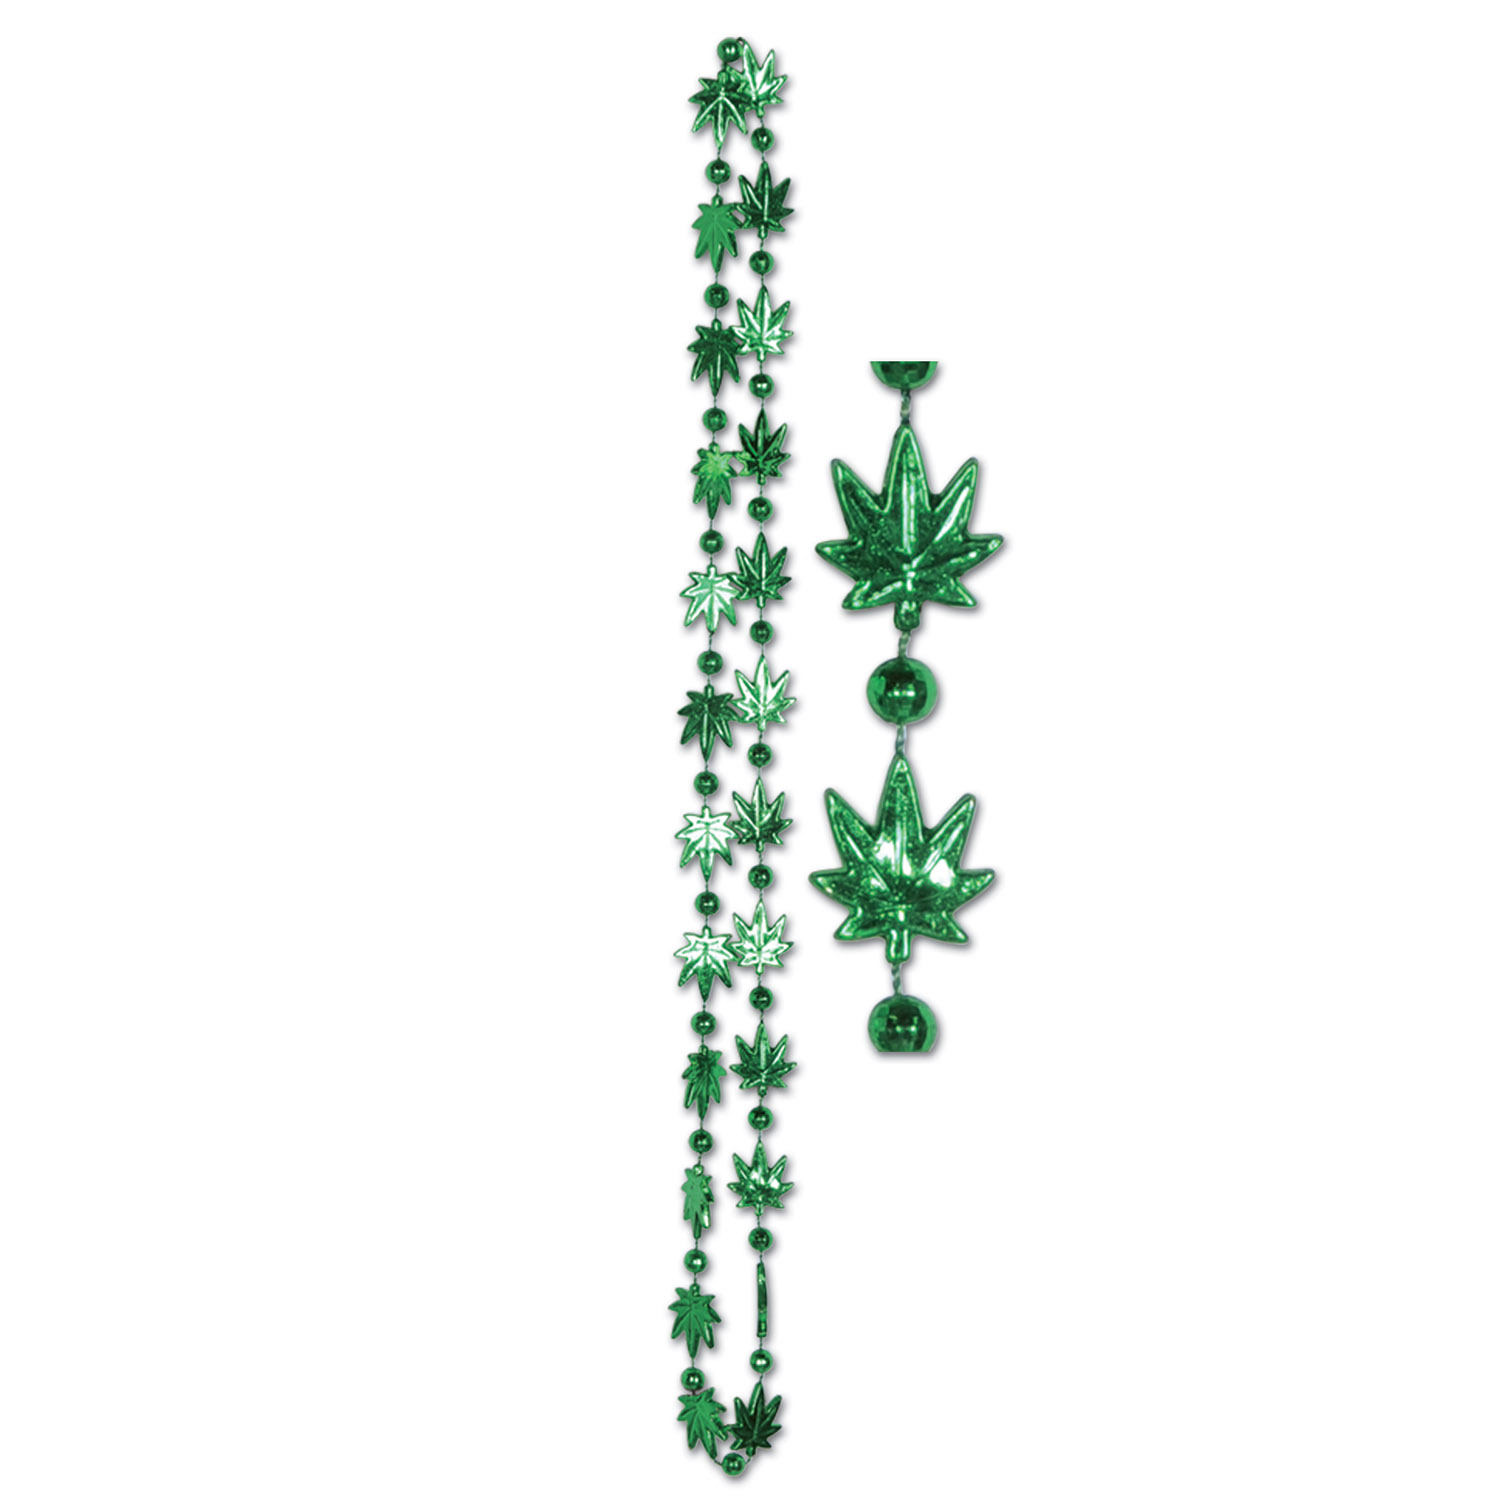 12 Pieces of Weed Beads